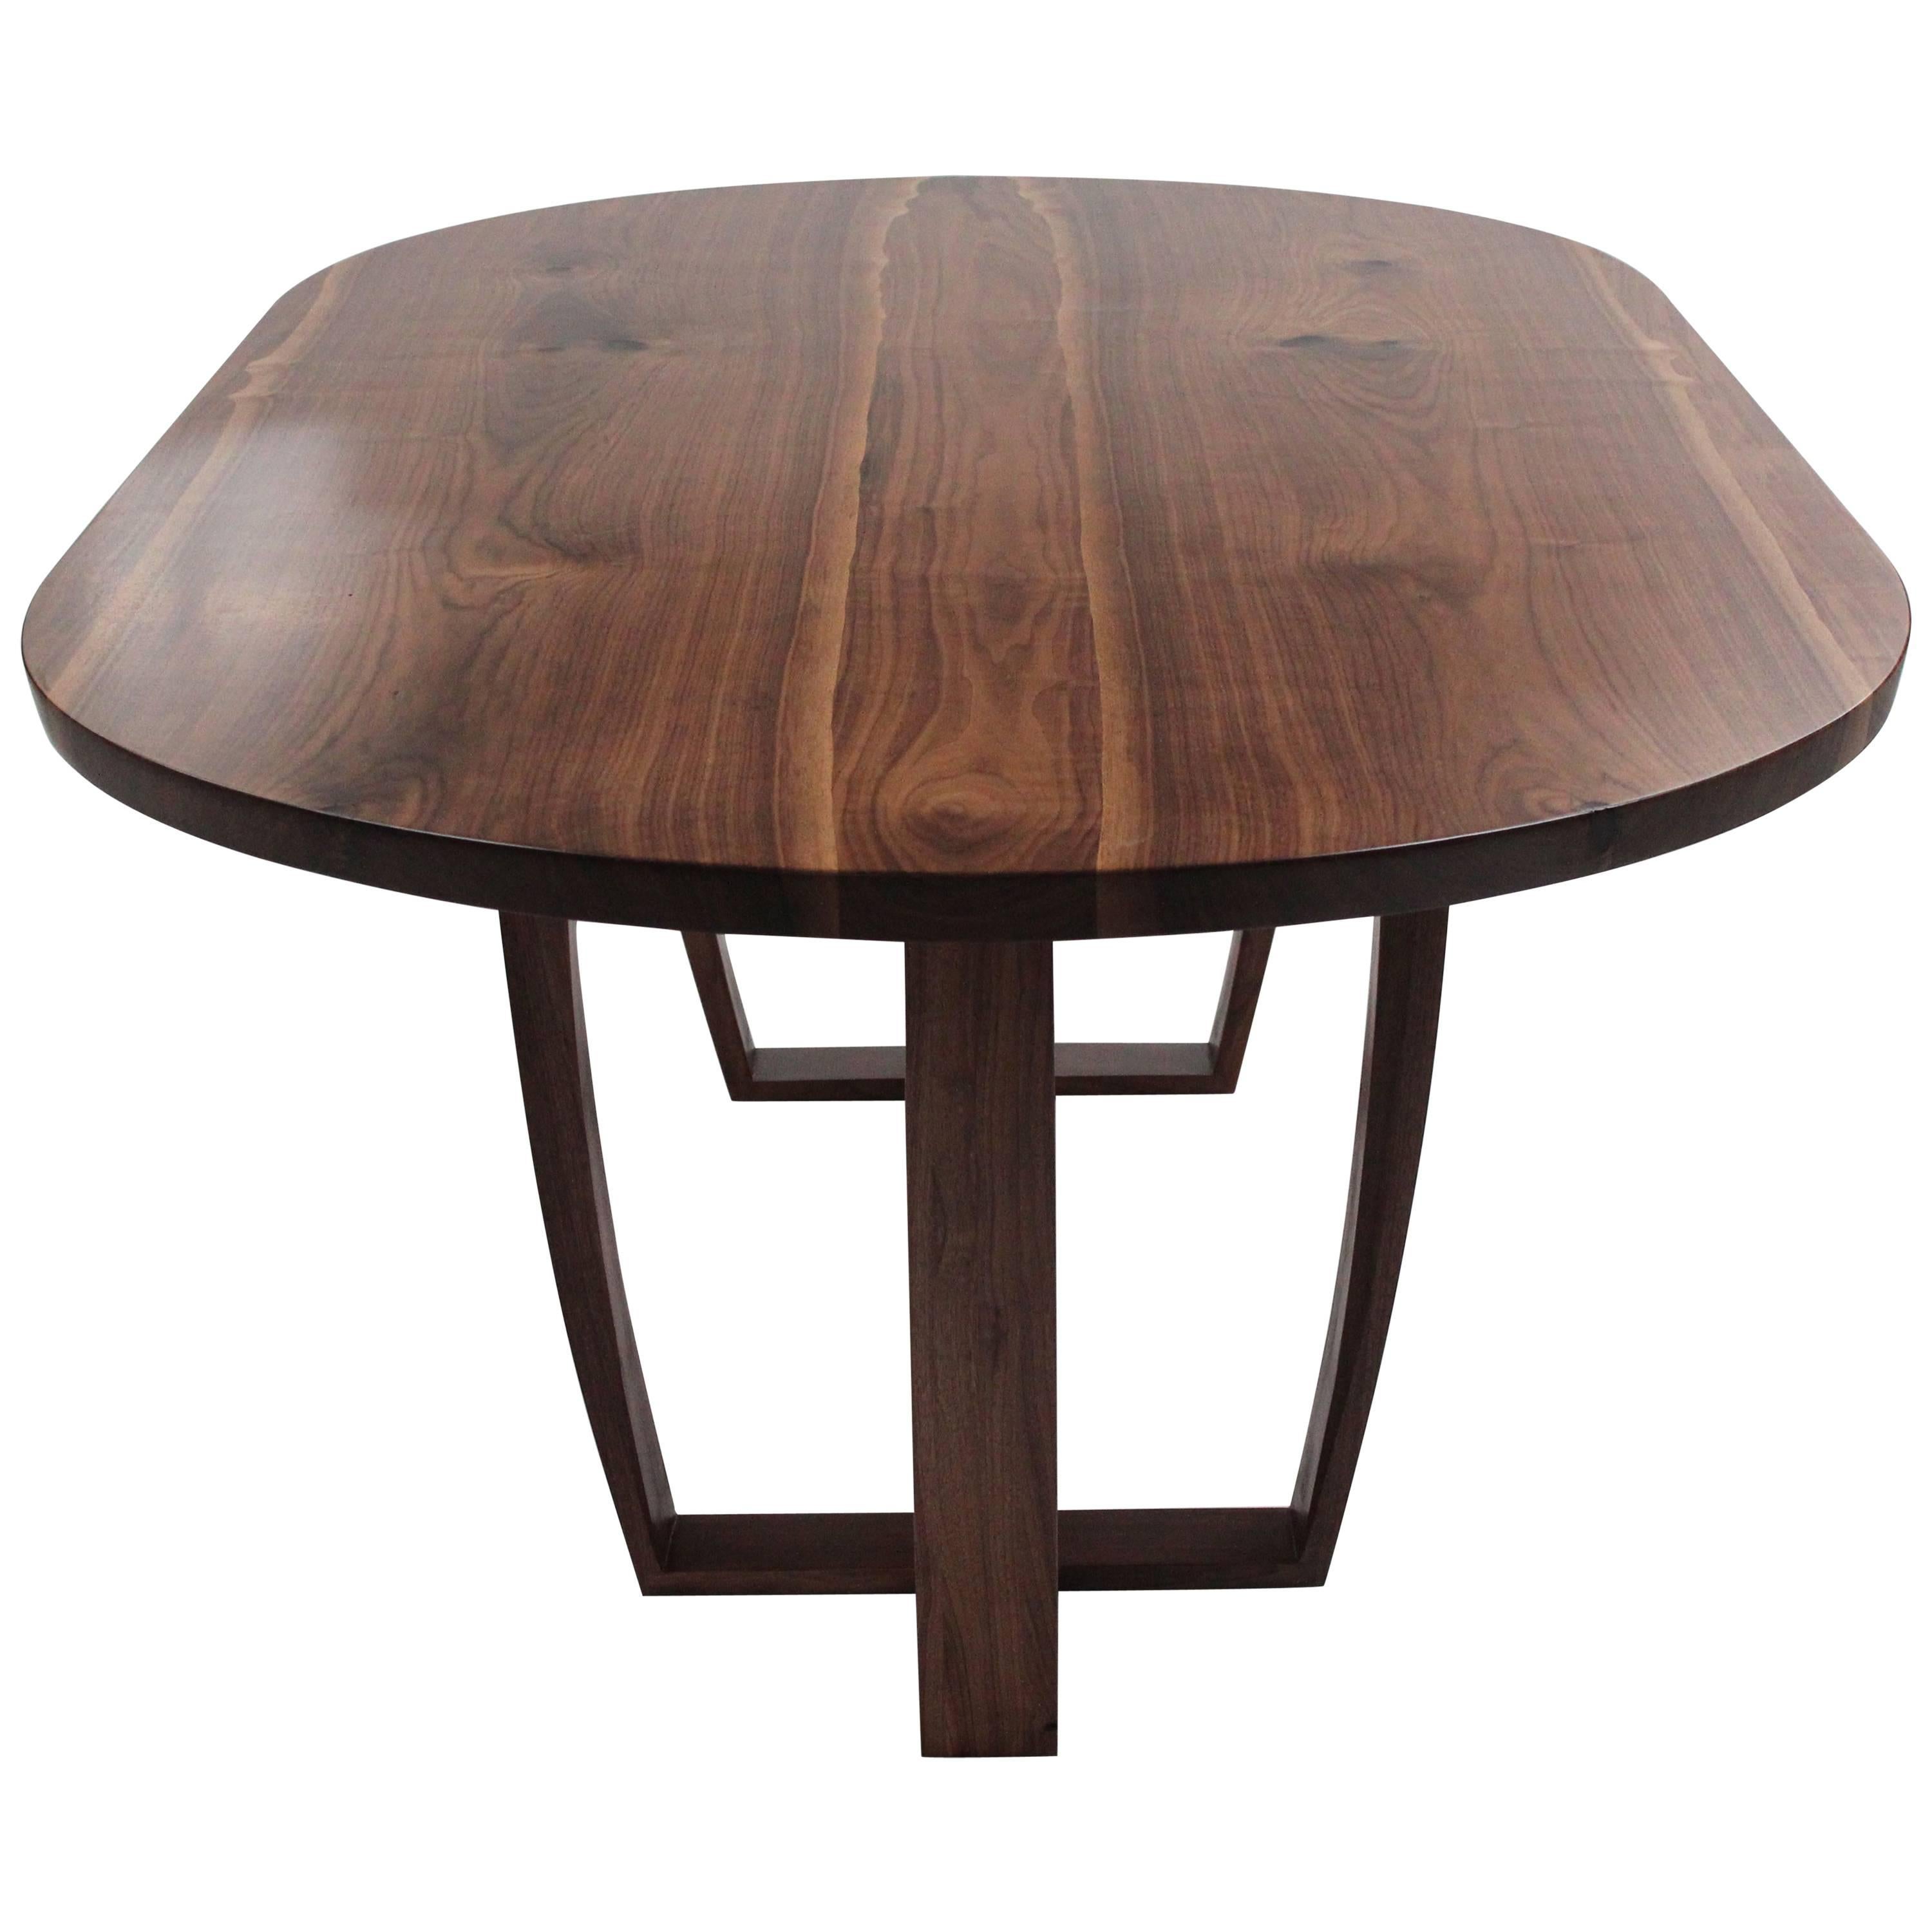 Contemporary oval dining table in book matched American black walnut. Bespoke. 